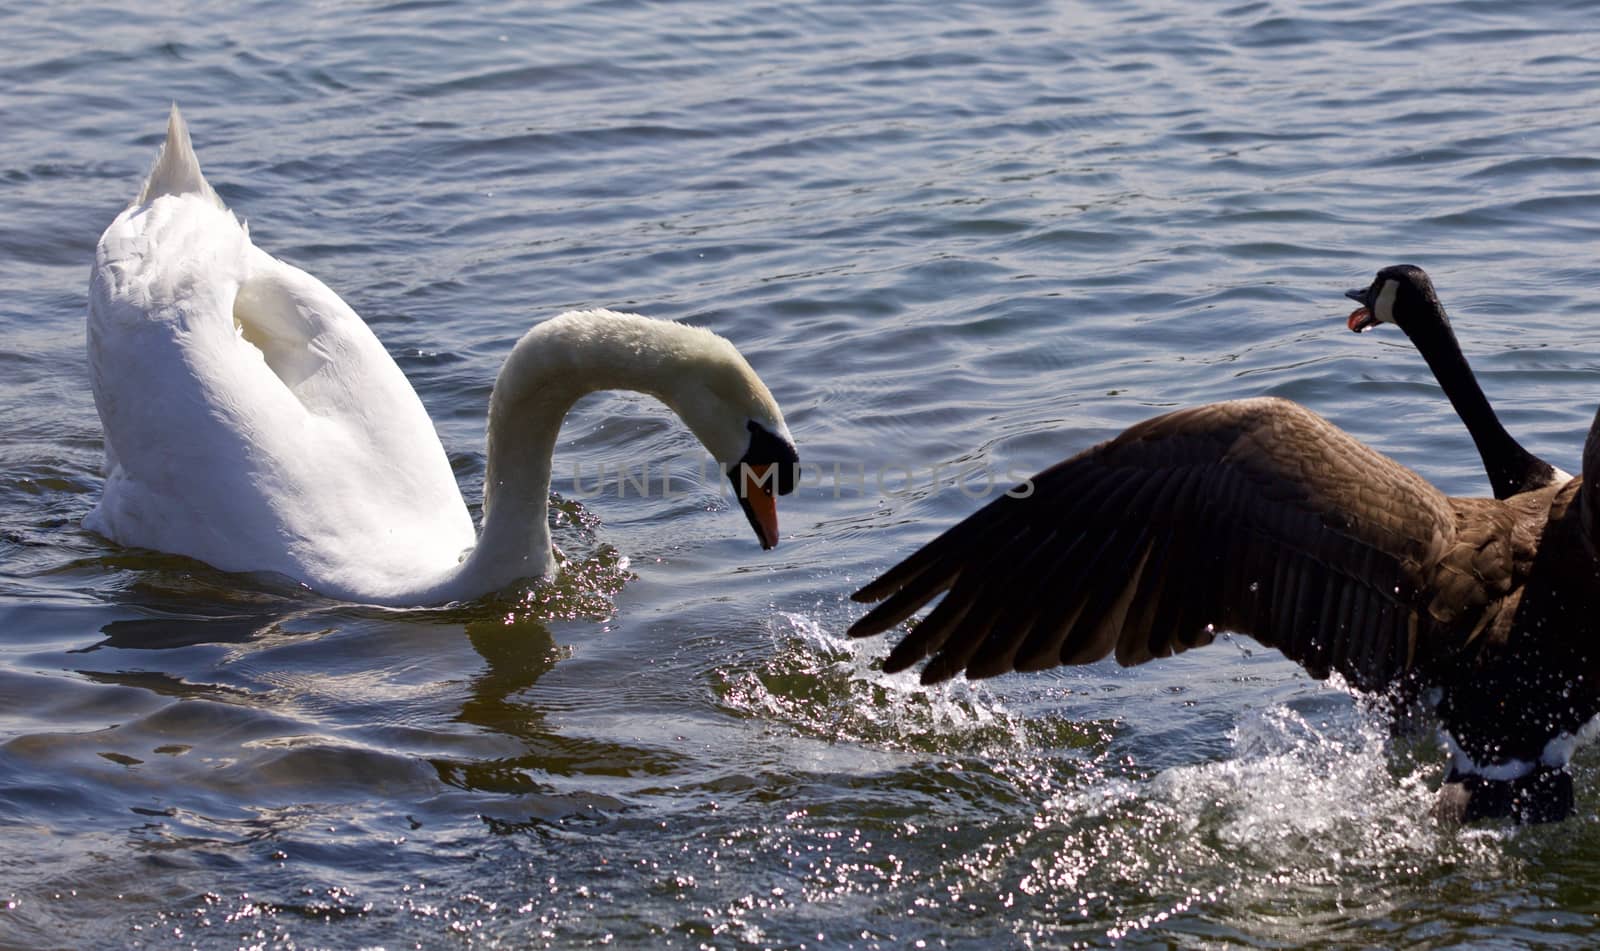 Amazing fight between the Canada goose and the swan